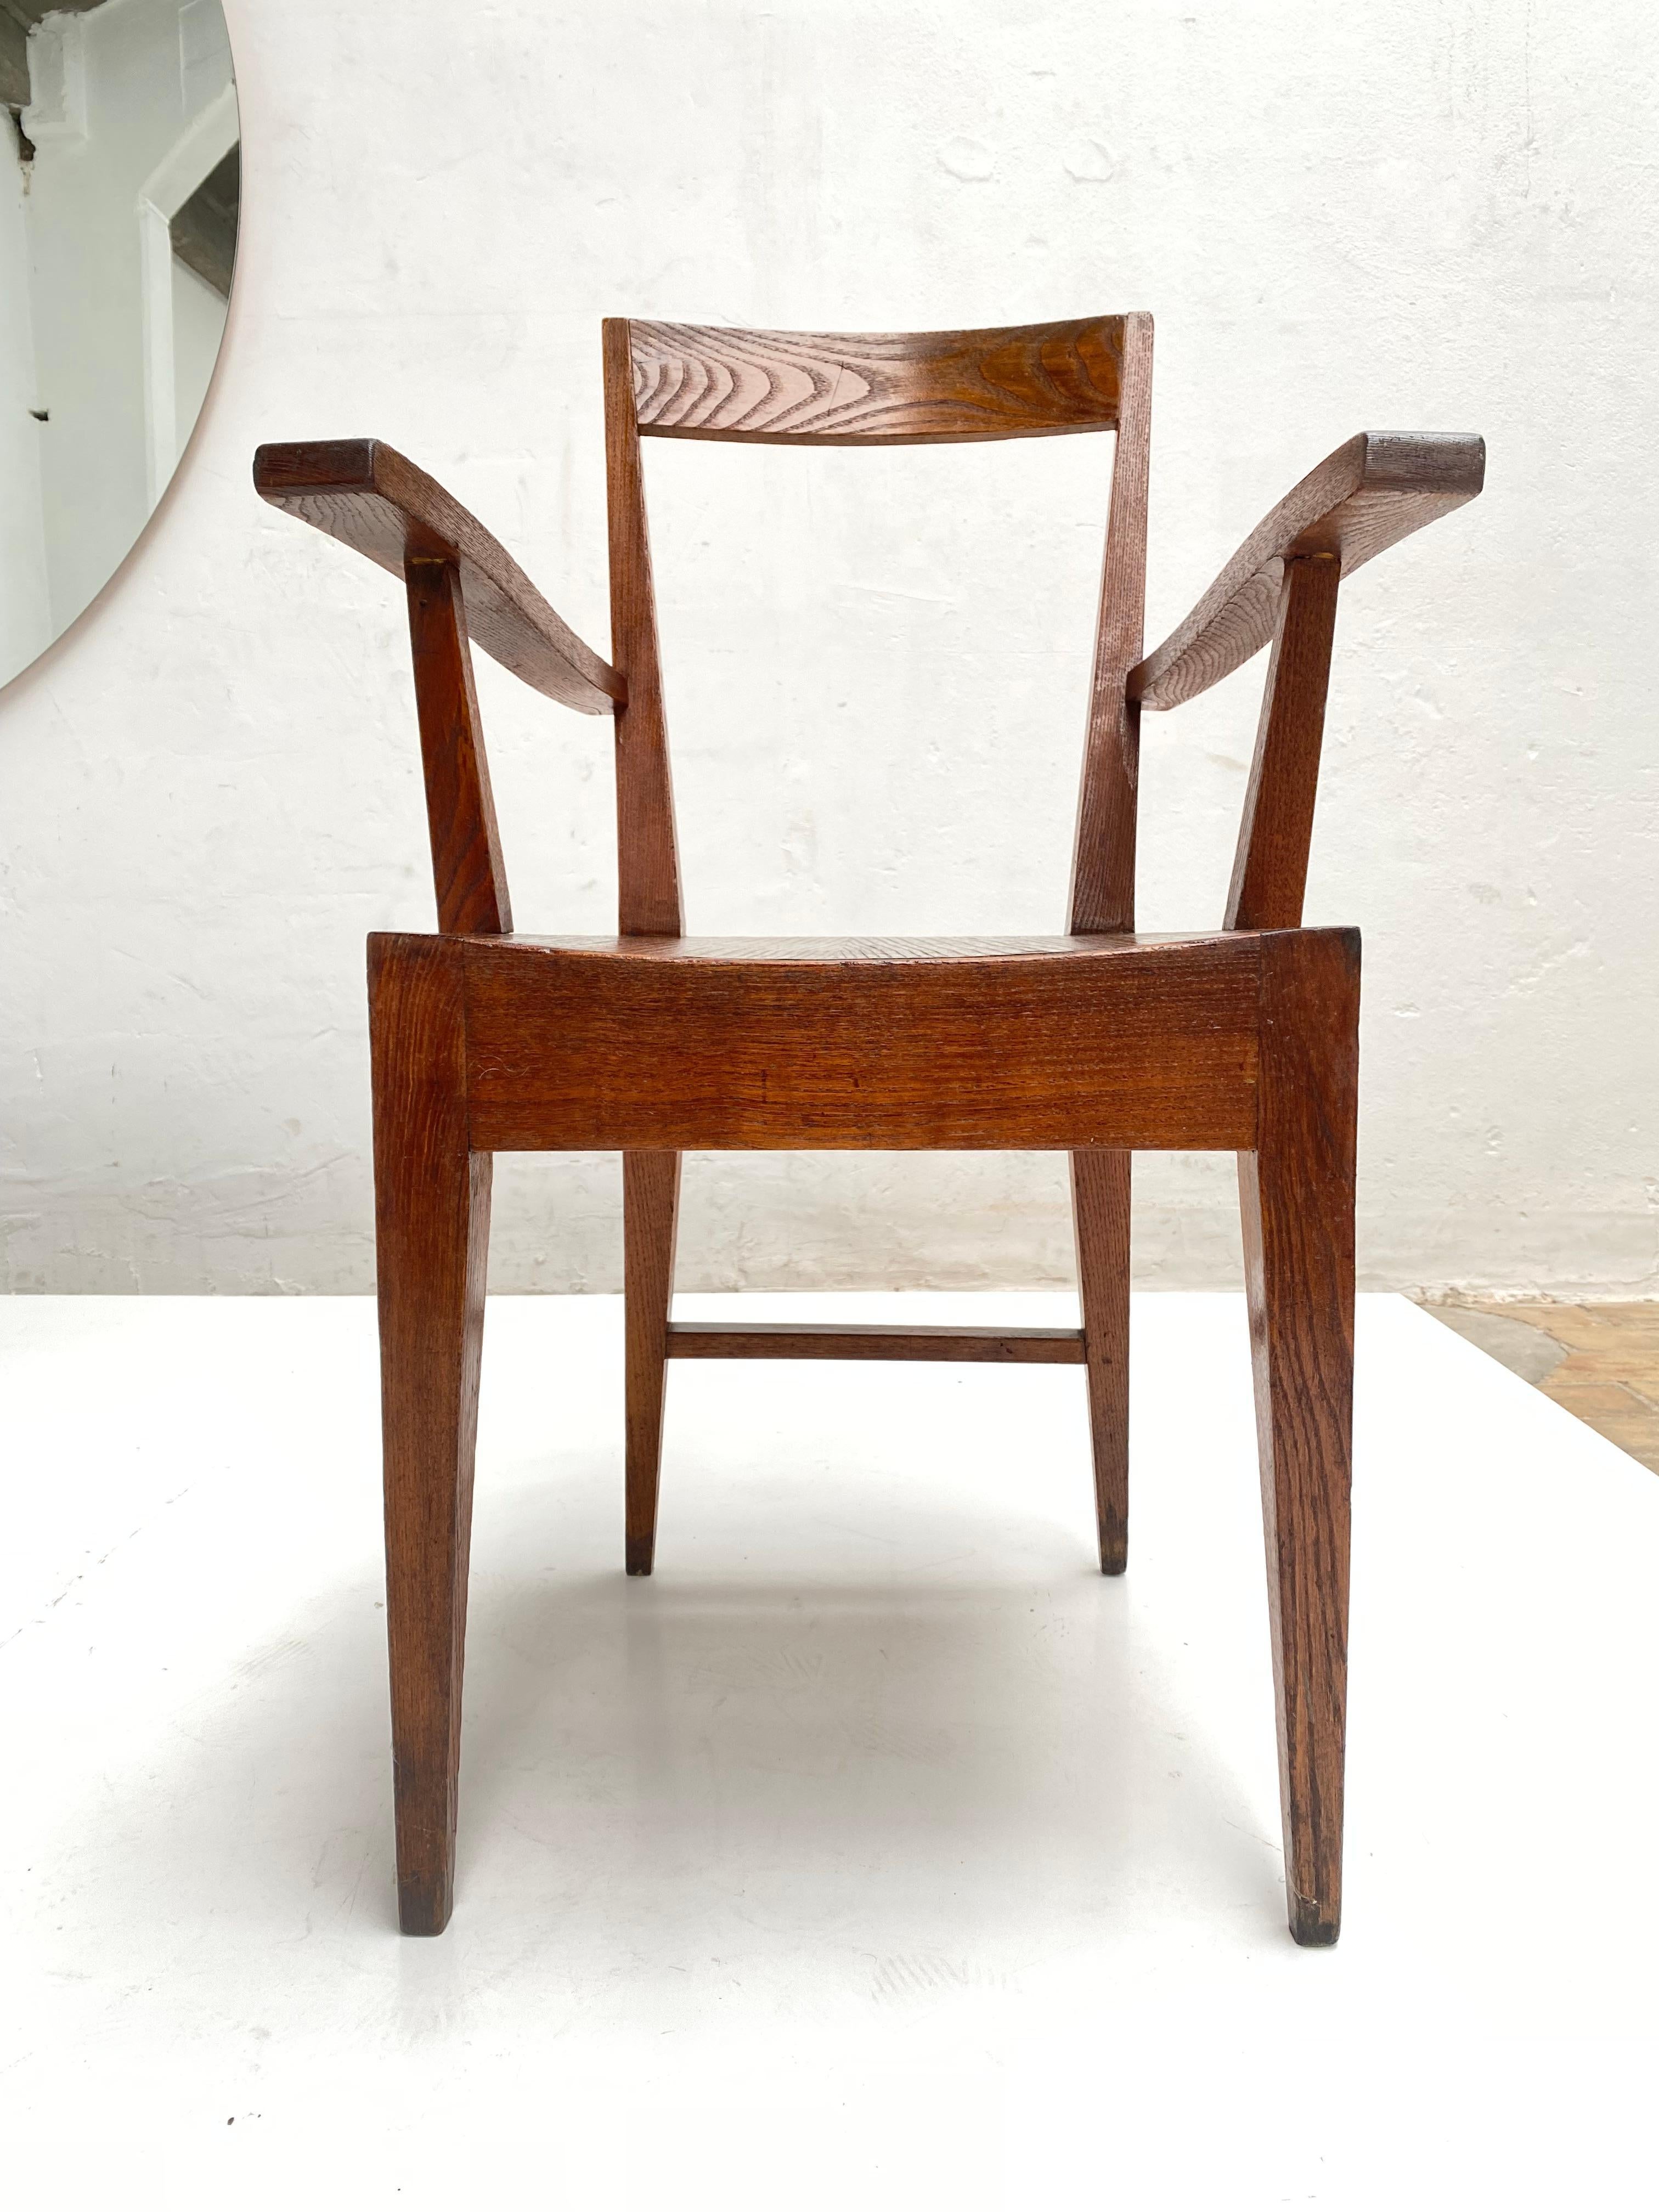 Rare and lovely hand crafted walnut armchair from the Univerity of Padova (Padua), Italy circa 1935-7. This design of this chair adheres very strongly to Gio Ponti's design aesthetic of the period , Ponti created most of the furnishings for the